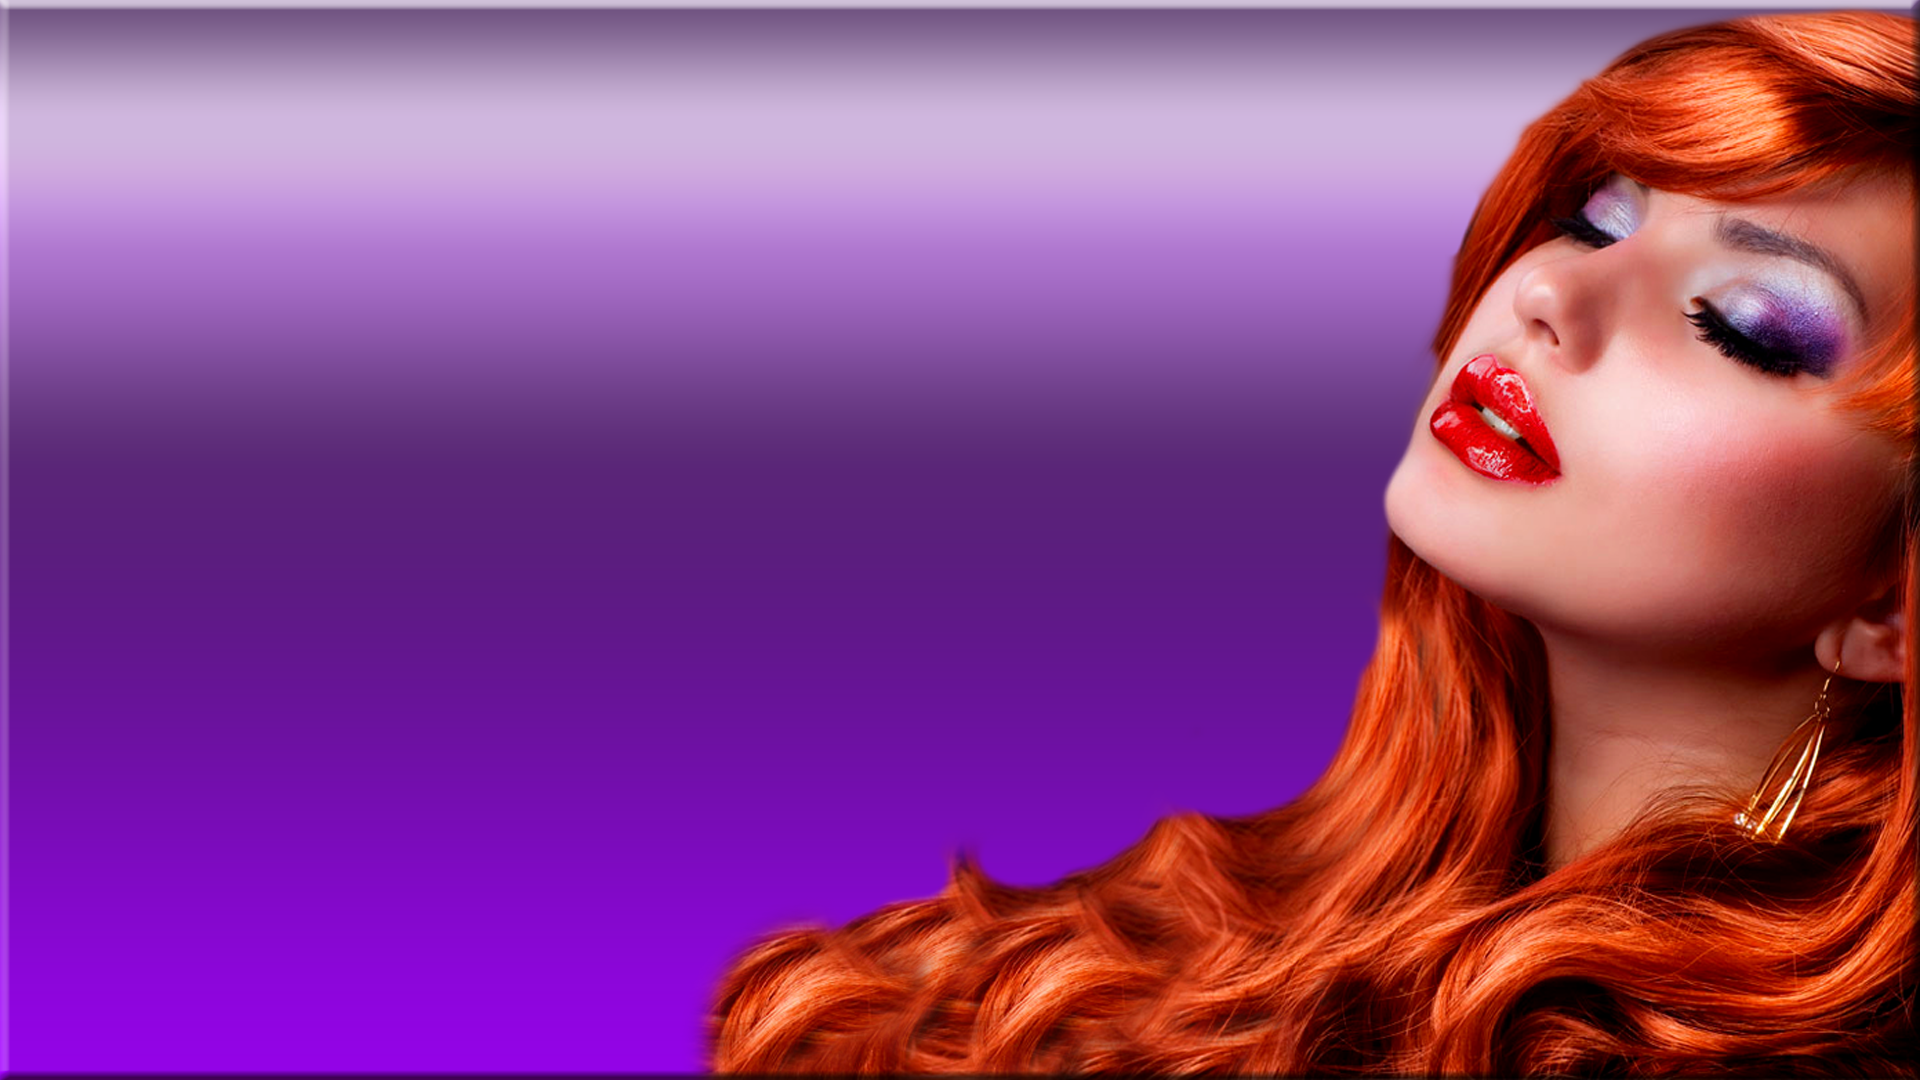 Free Download Beautiful Redhead Computer Wallpapers Desktop Backgrounds [1920x1080] For Your